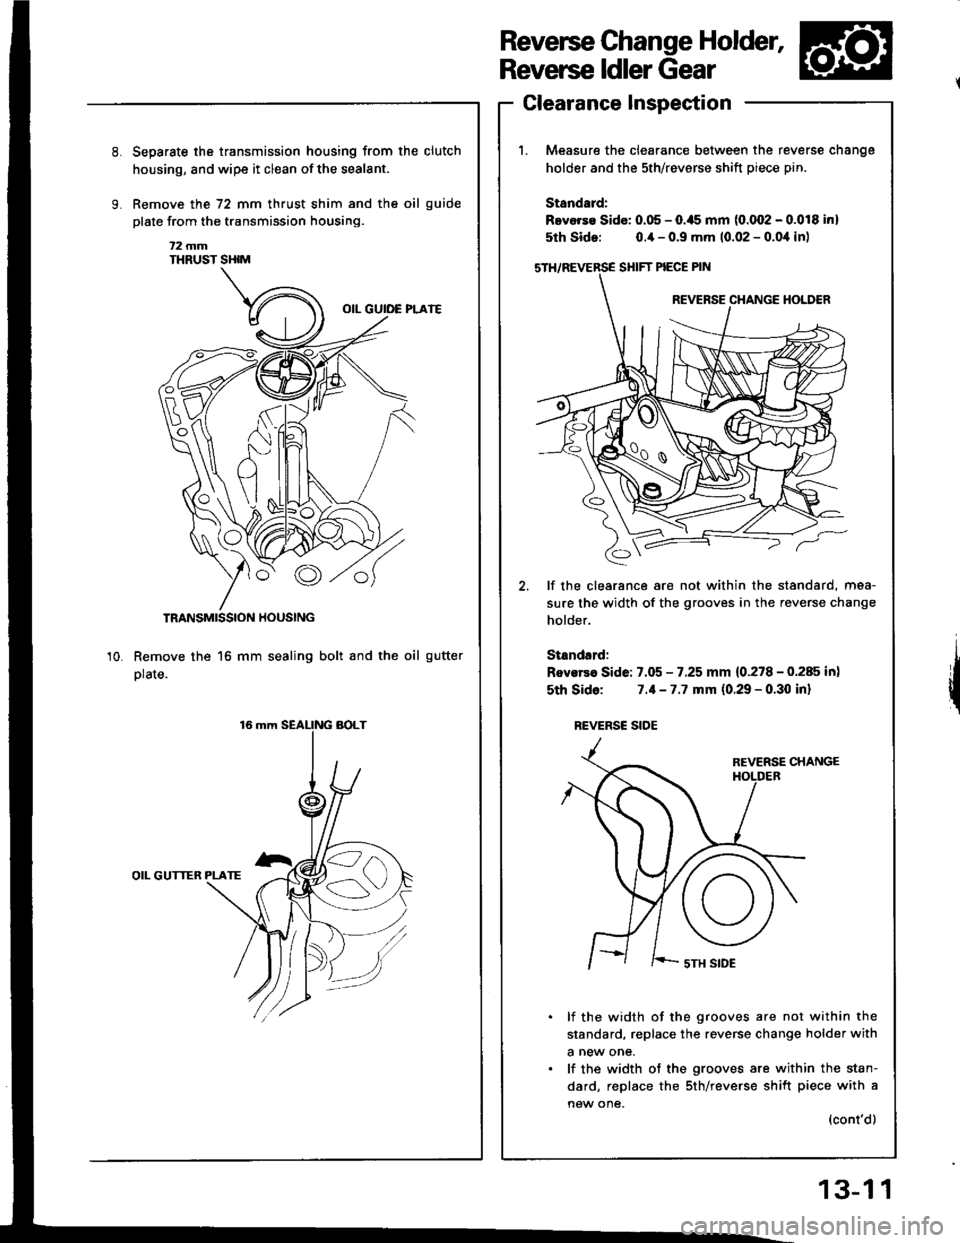 HONDA INTEGRA 1994 4.G Workshop Manual Reverse Change Holder,
Reverse ldler Gear
Clearance Inspection
Measure the clearance between the re
holder and the sth/revsrse shift piece p
Standard:
Bevorse Sido: 0.05 - O.ils mm (0.002 - (
5th Sido